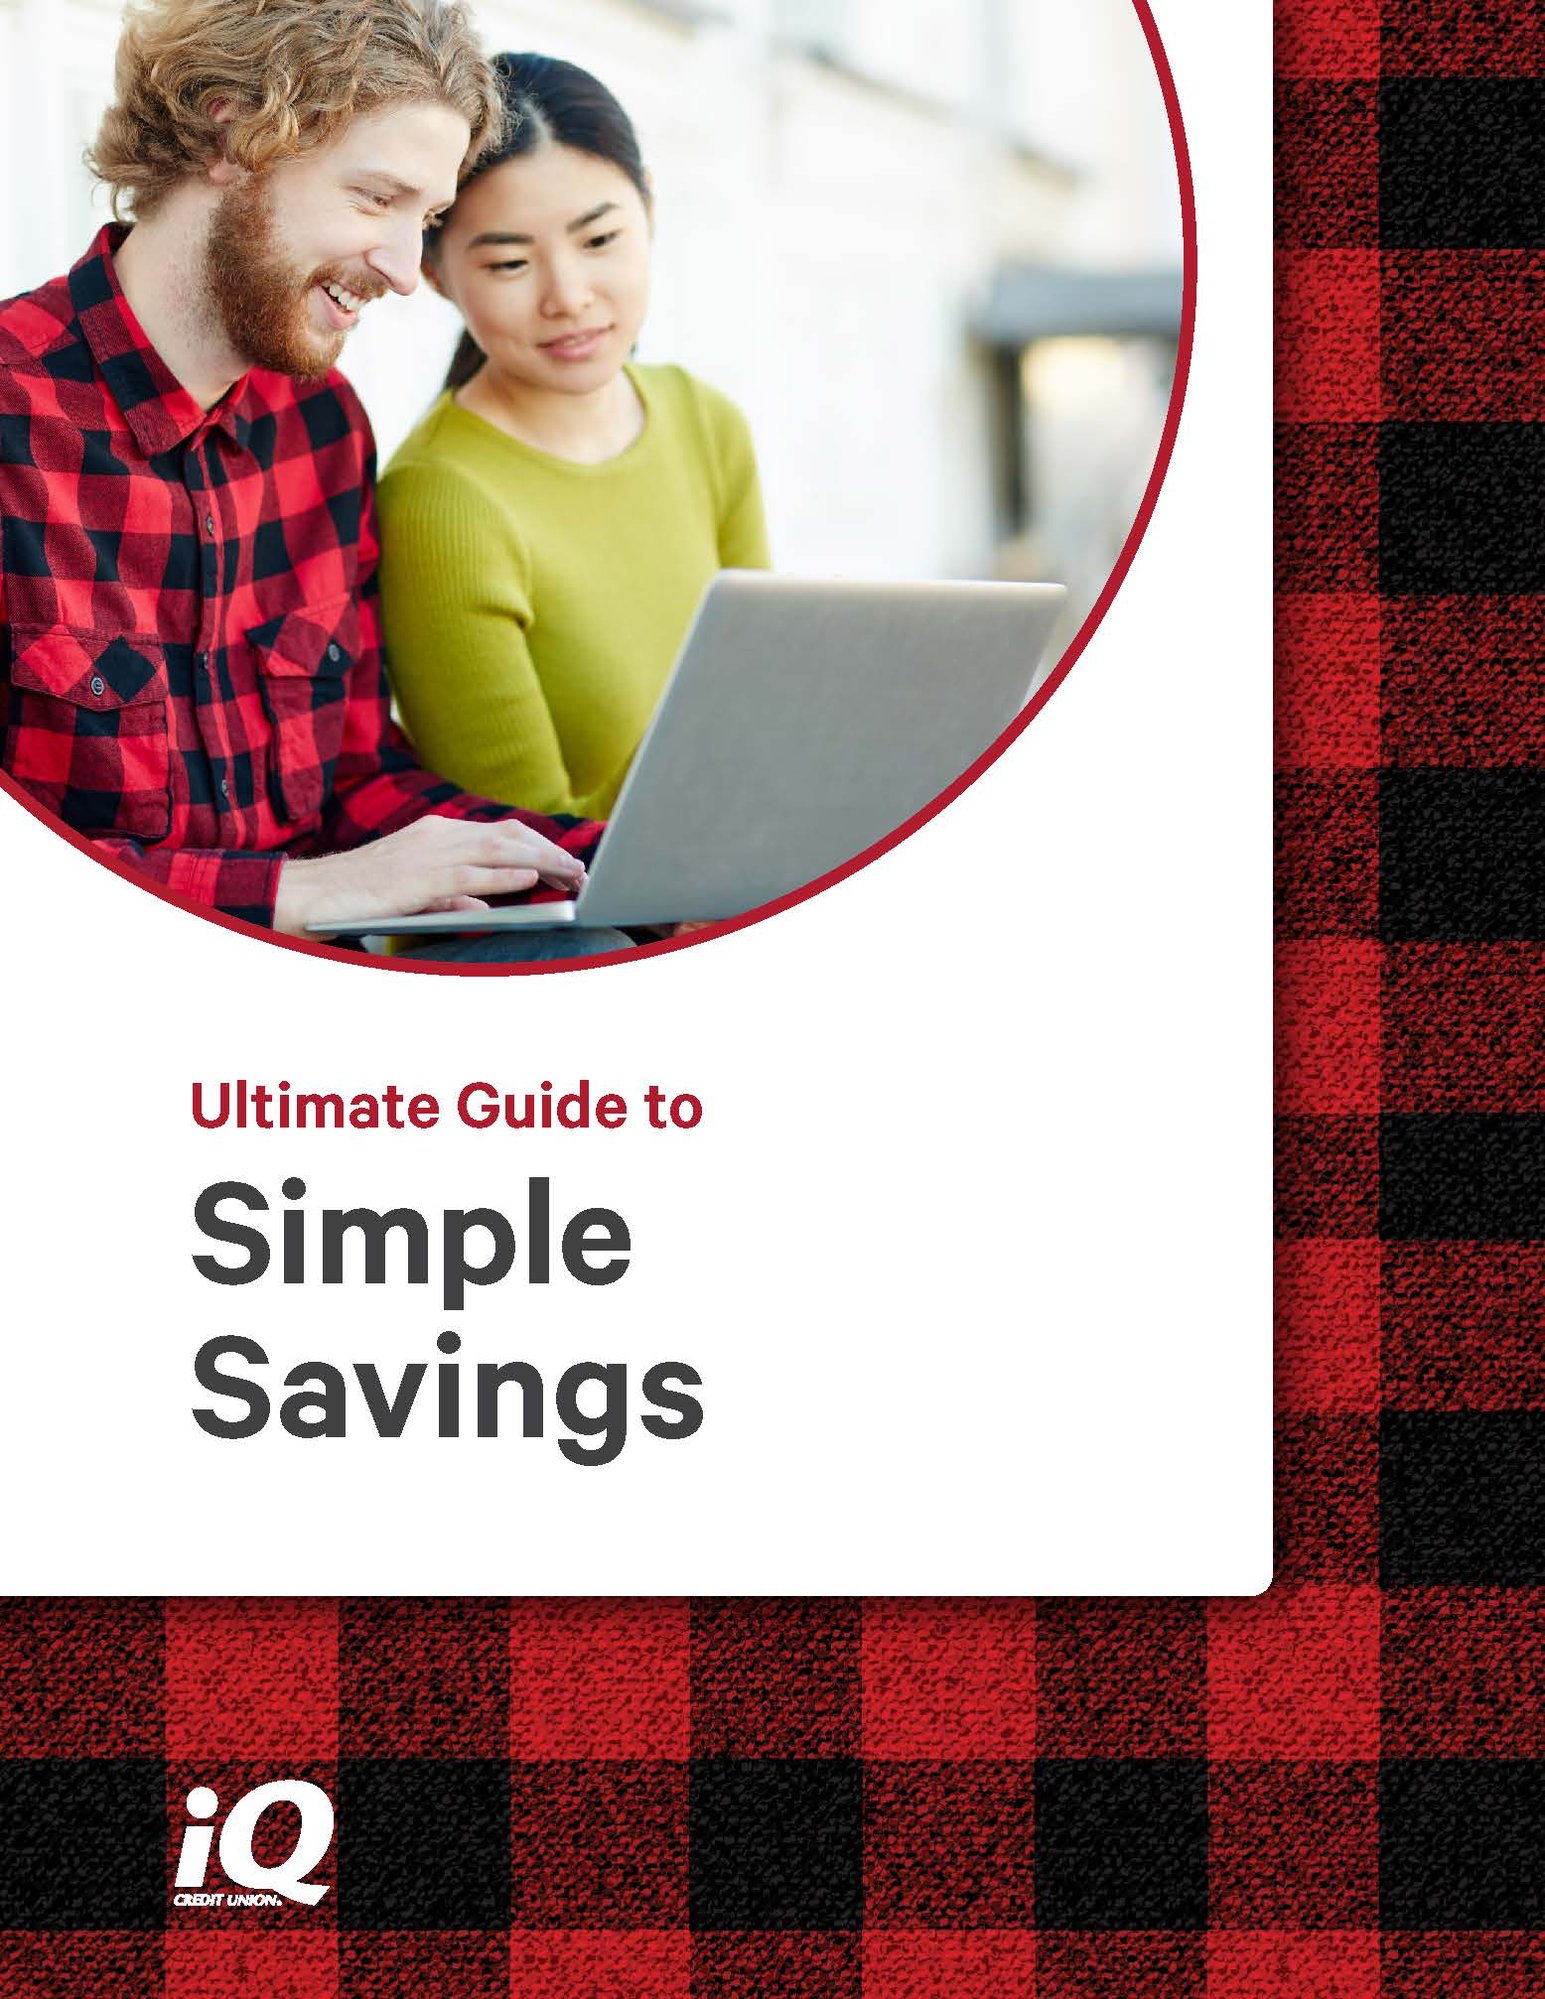 Ultimate Guide to Simple Savings Ebook Cover